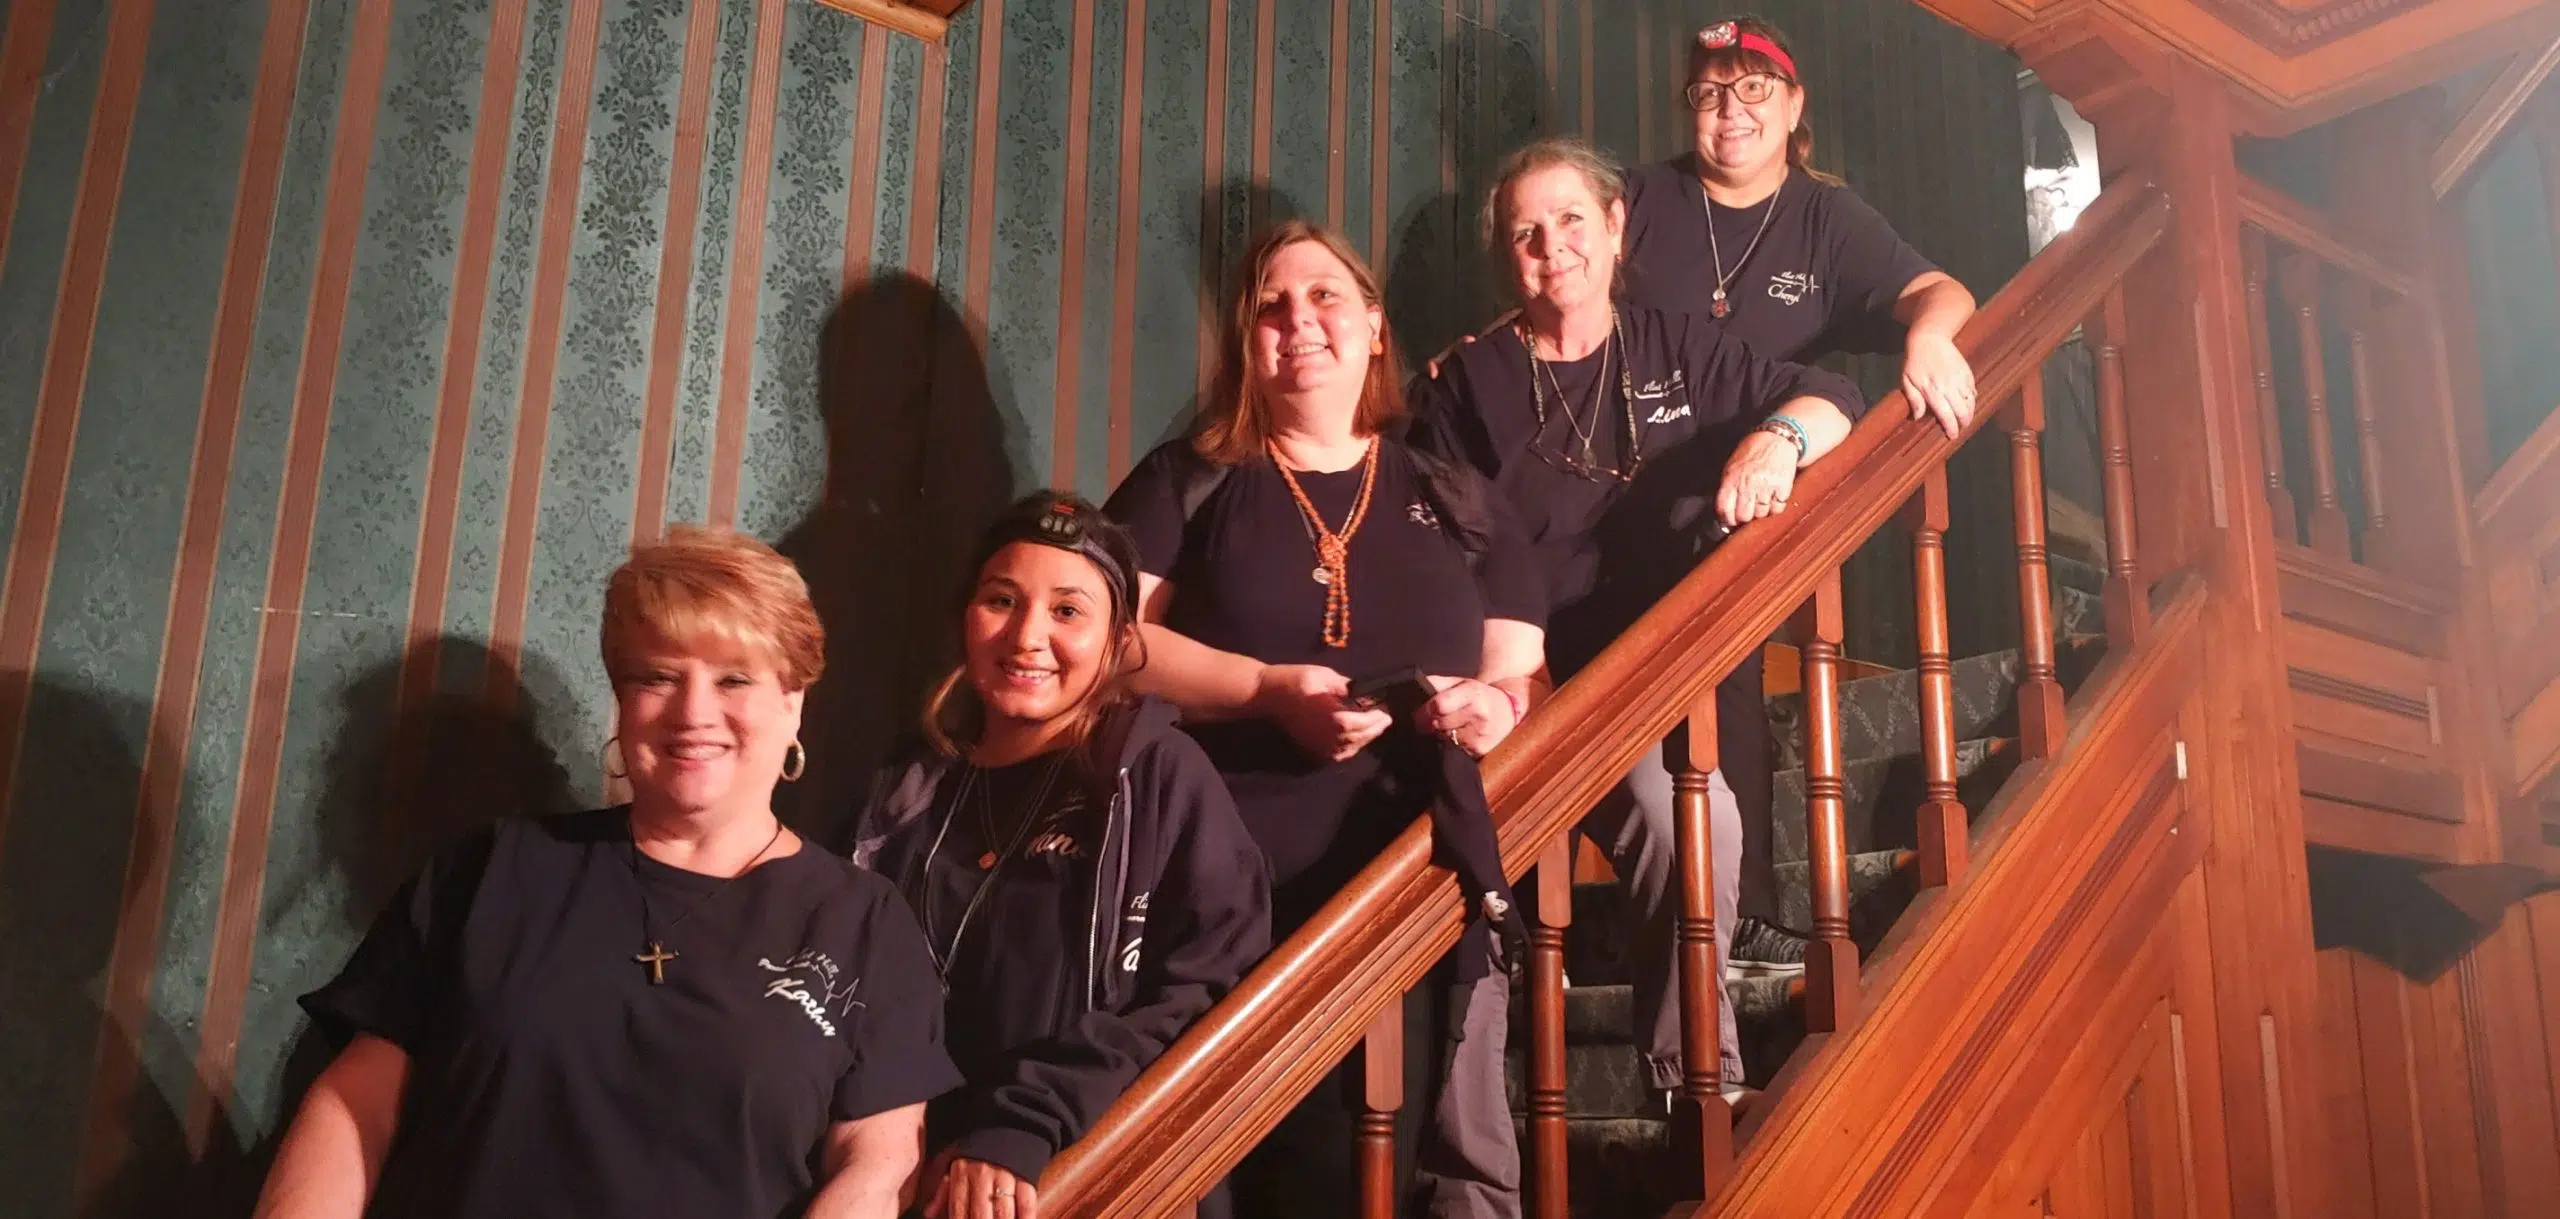 Flint Hills Paranormal leads farewell tour to spirits within Plumb Place Saturday evening